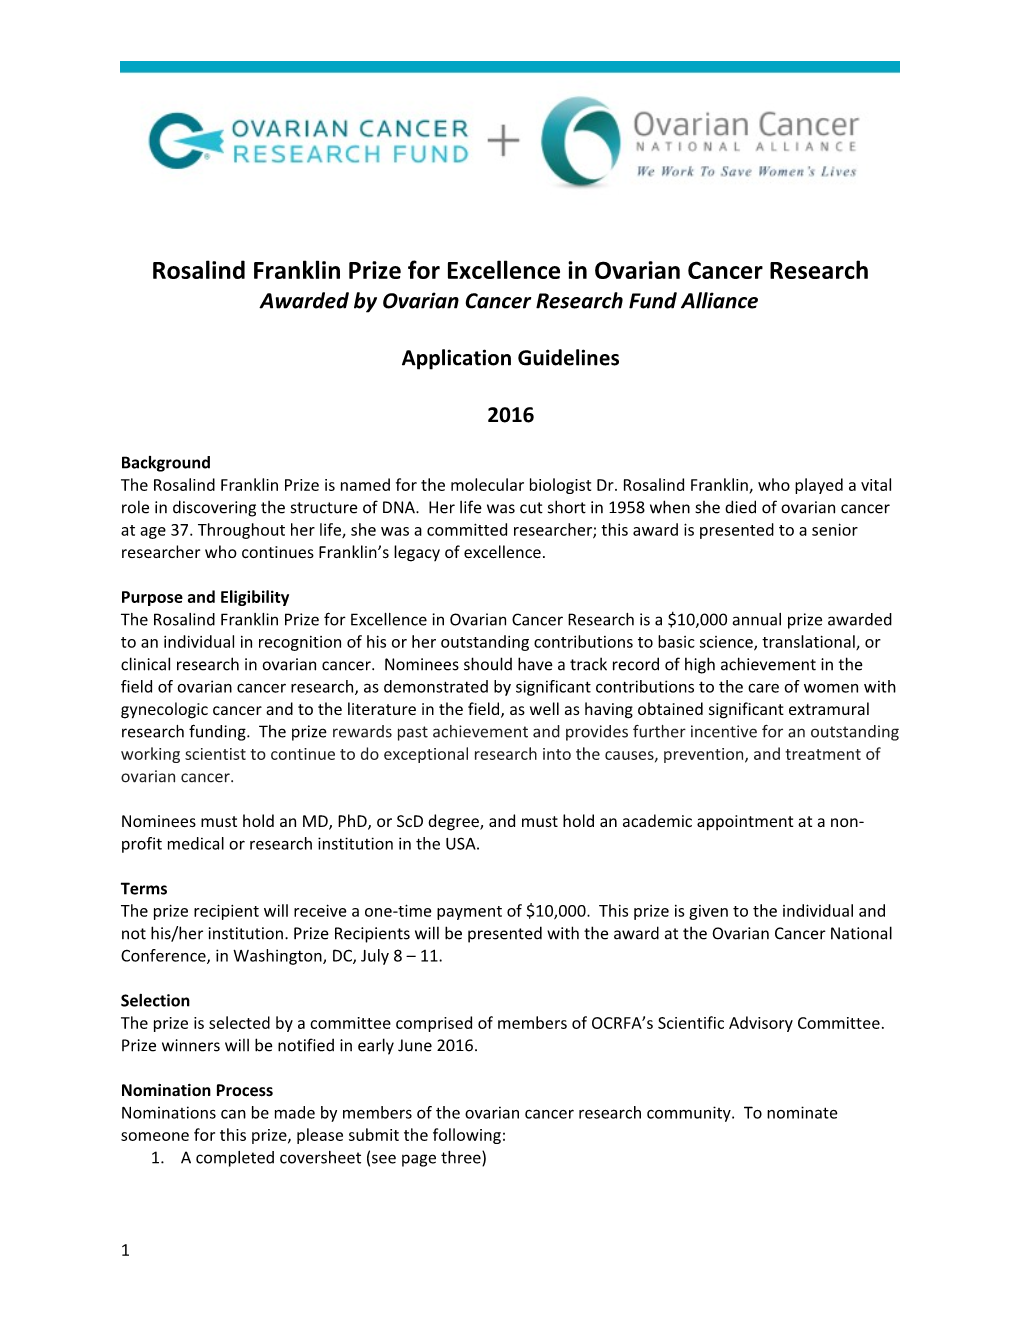 Rosalind Franklin Prize for Excellence in Ovarian Cancer Research